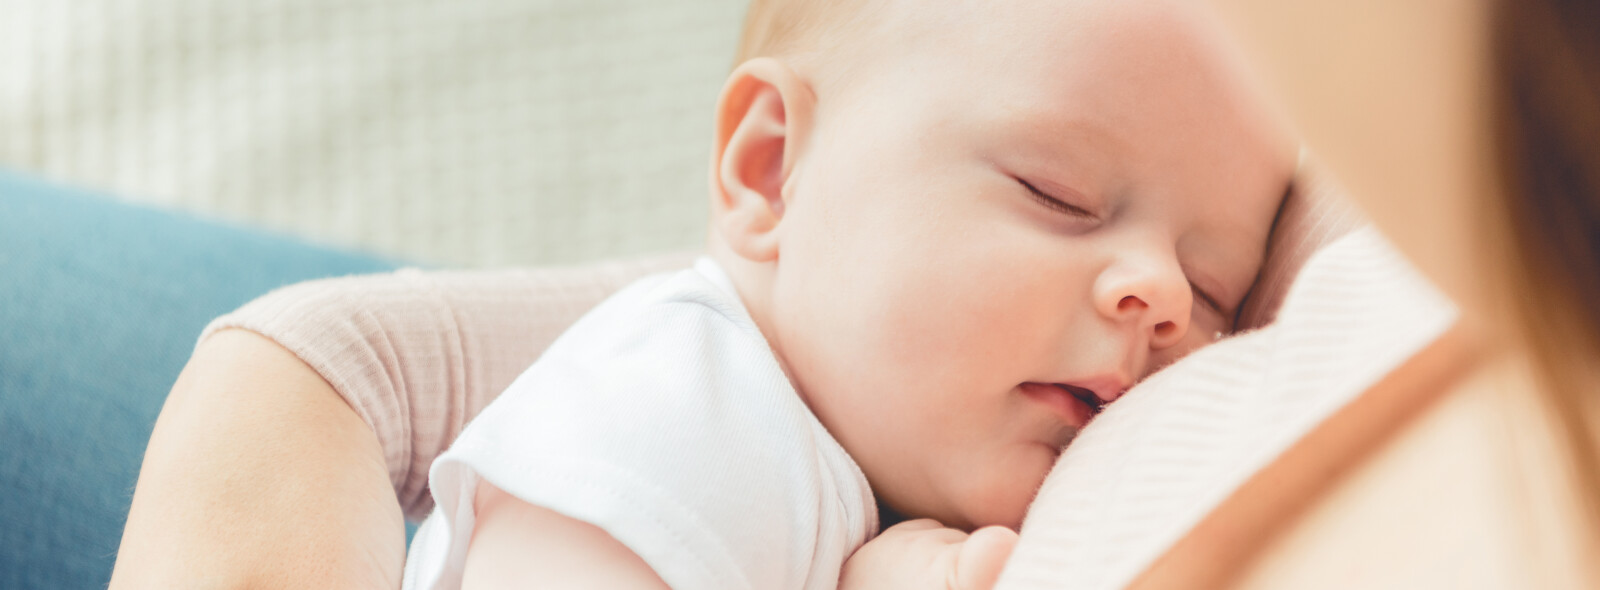 7 Keys to Survival When Your Baby Isn’t Sleeping